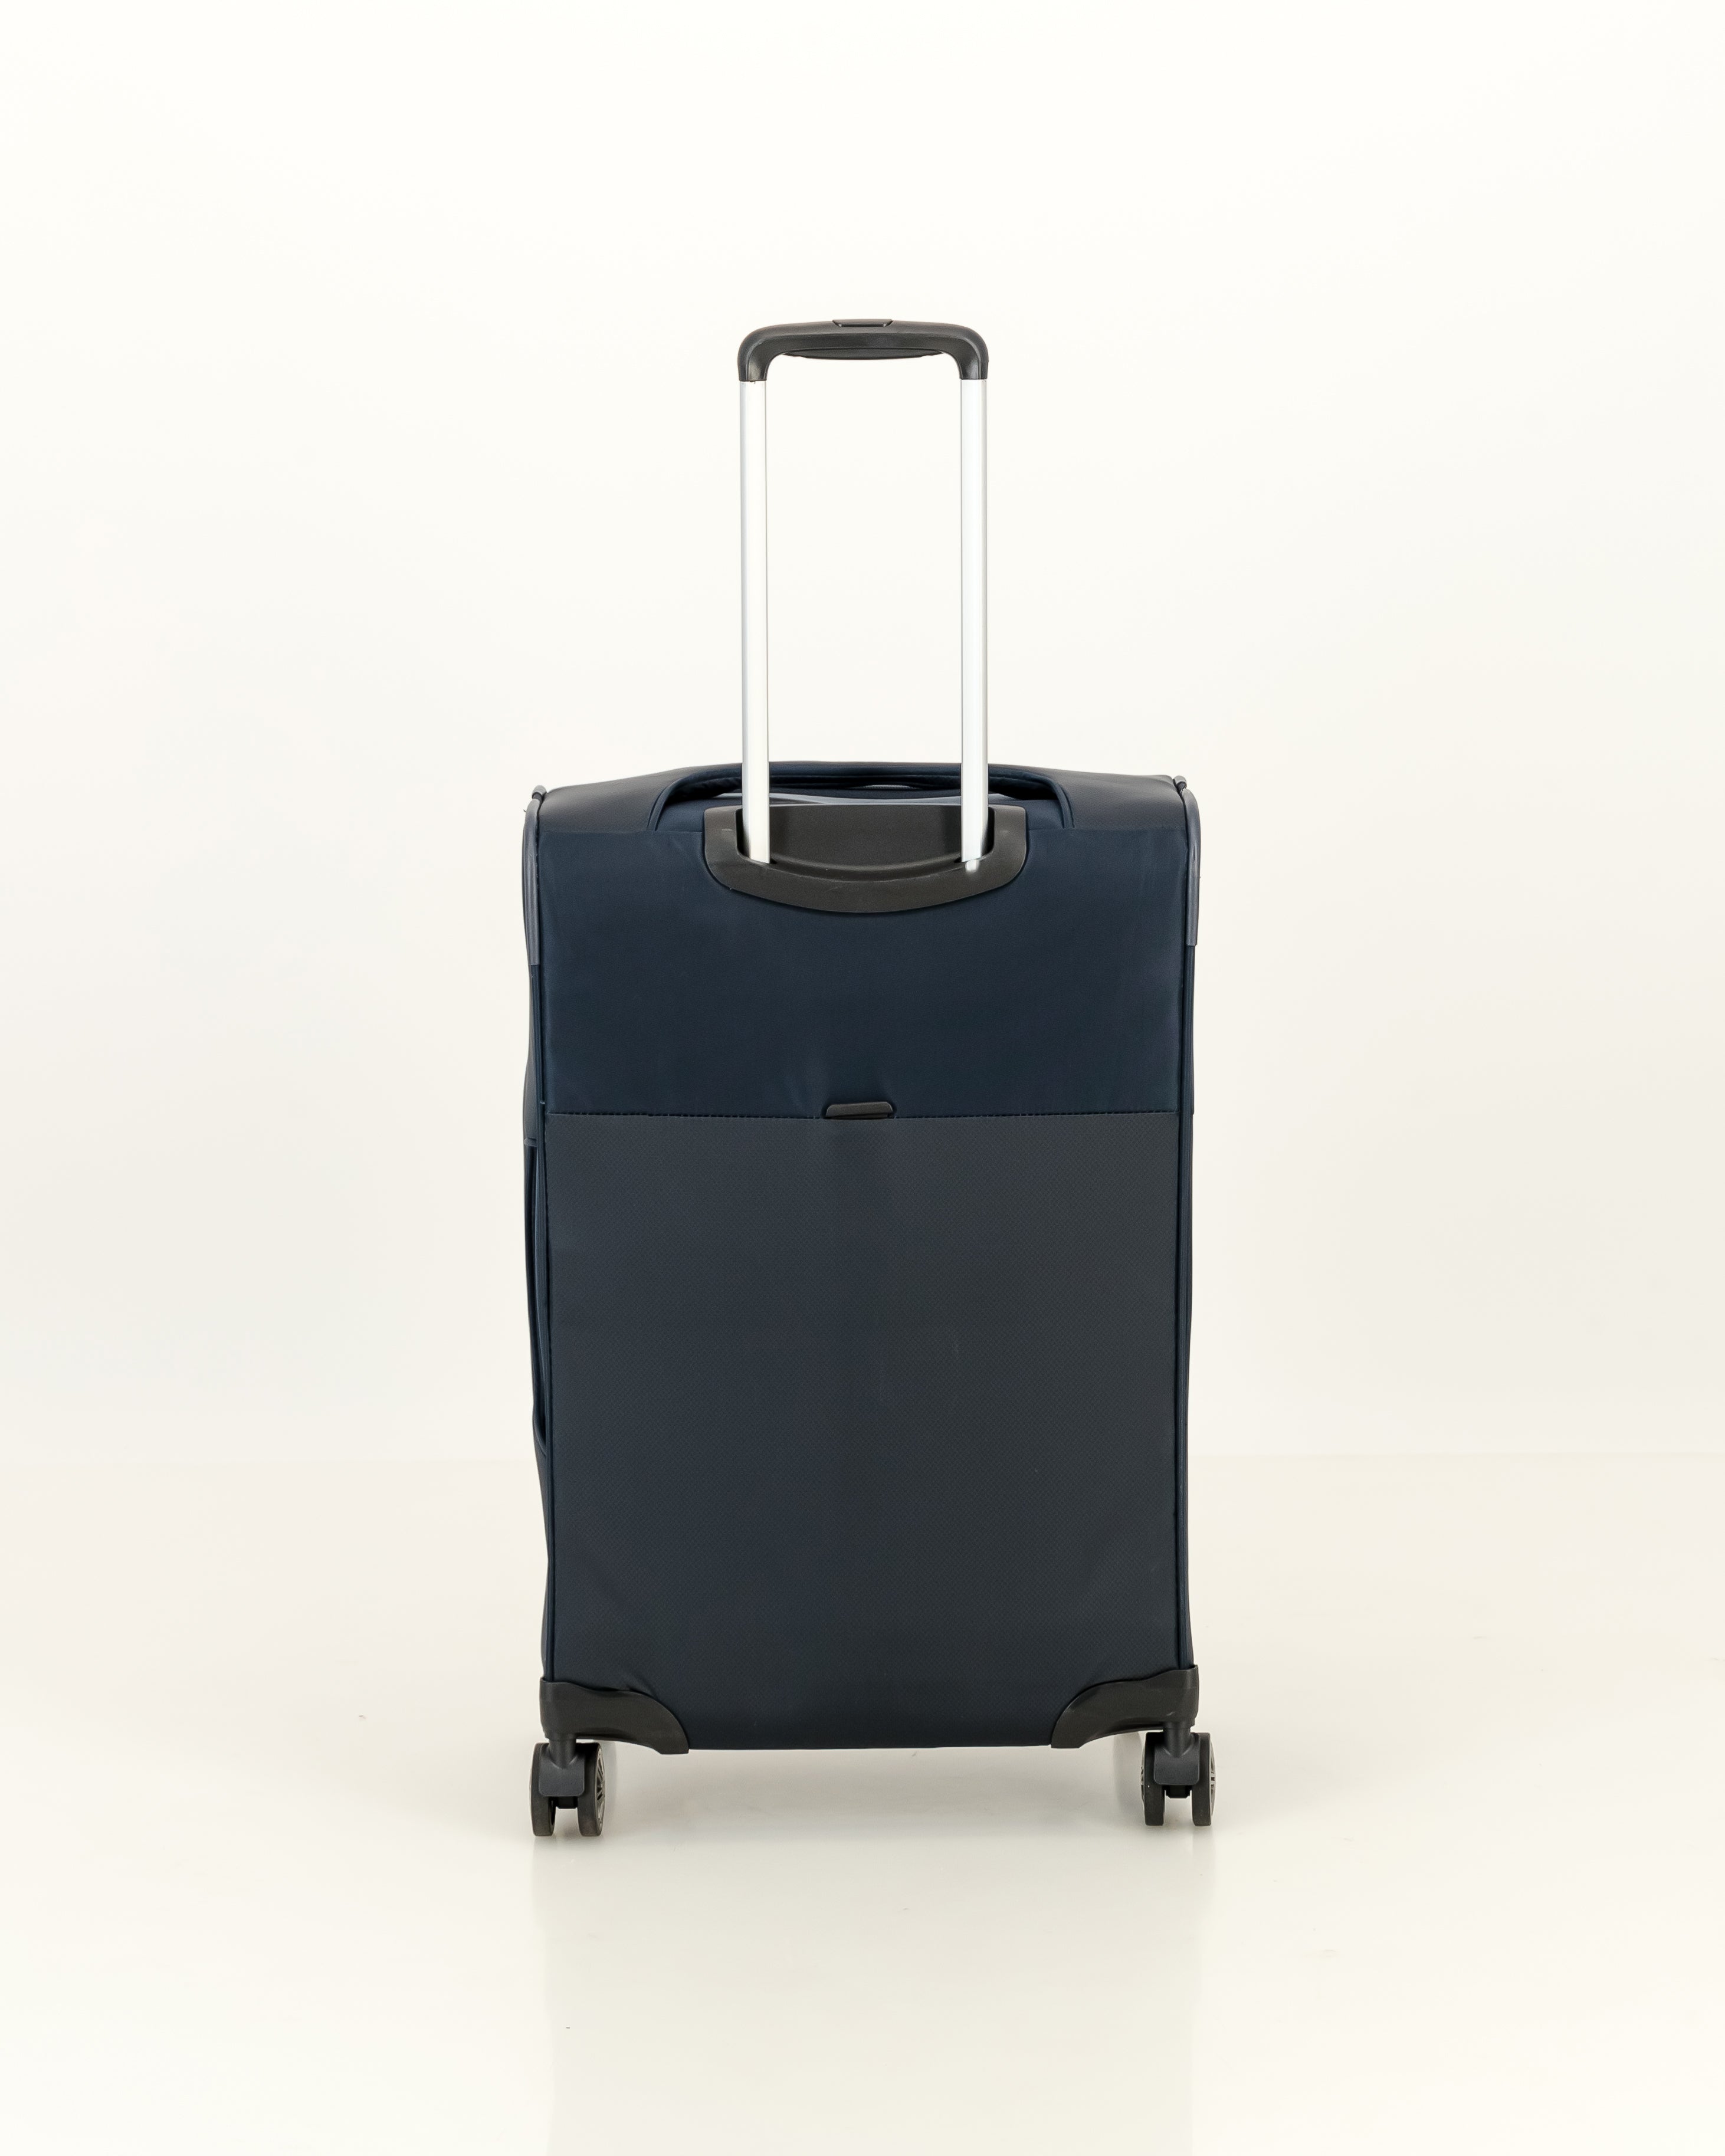 So-Fly X-Lite 4 Wheel Spinner Cabin Suitcase